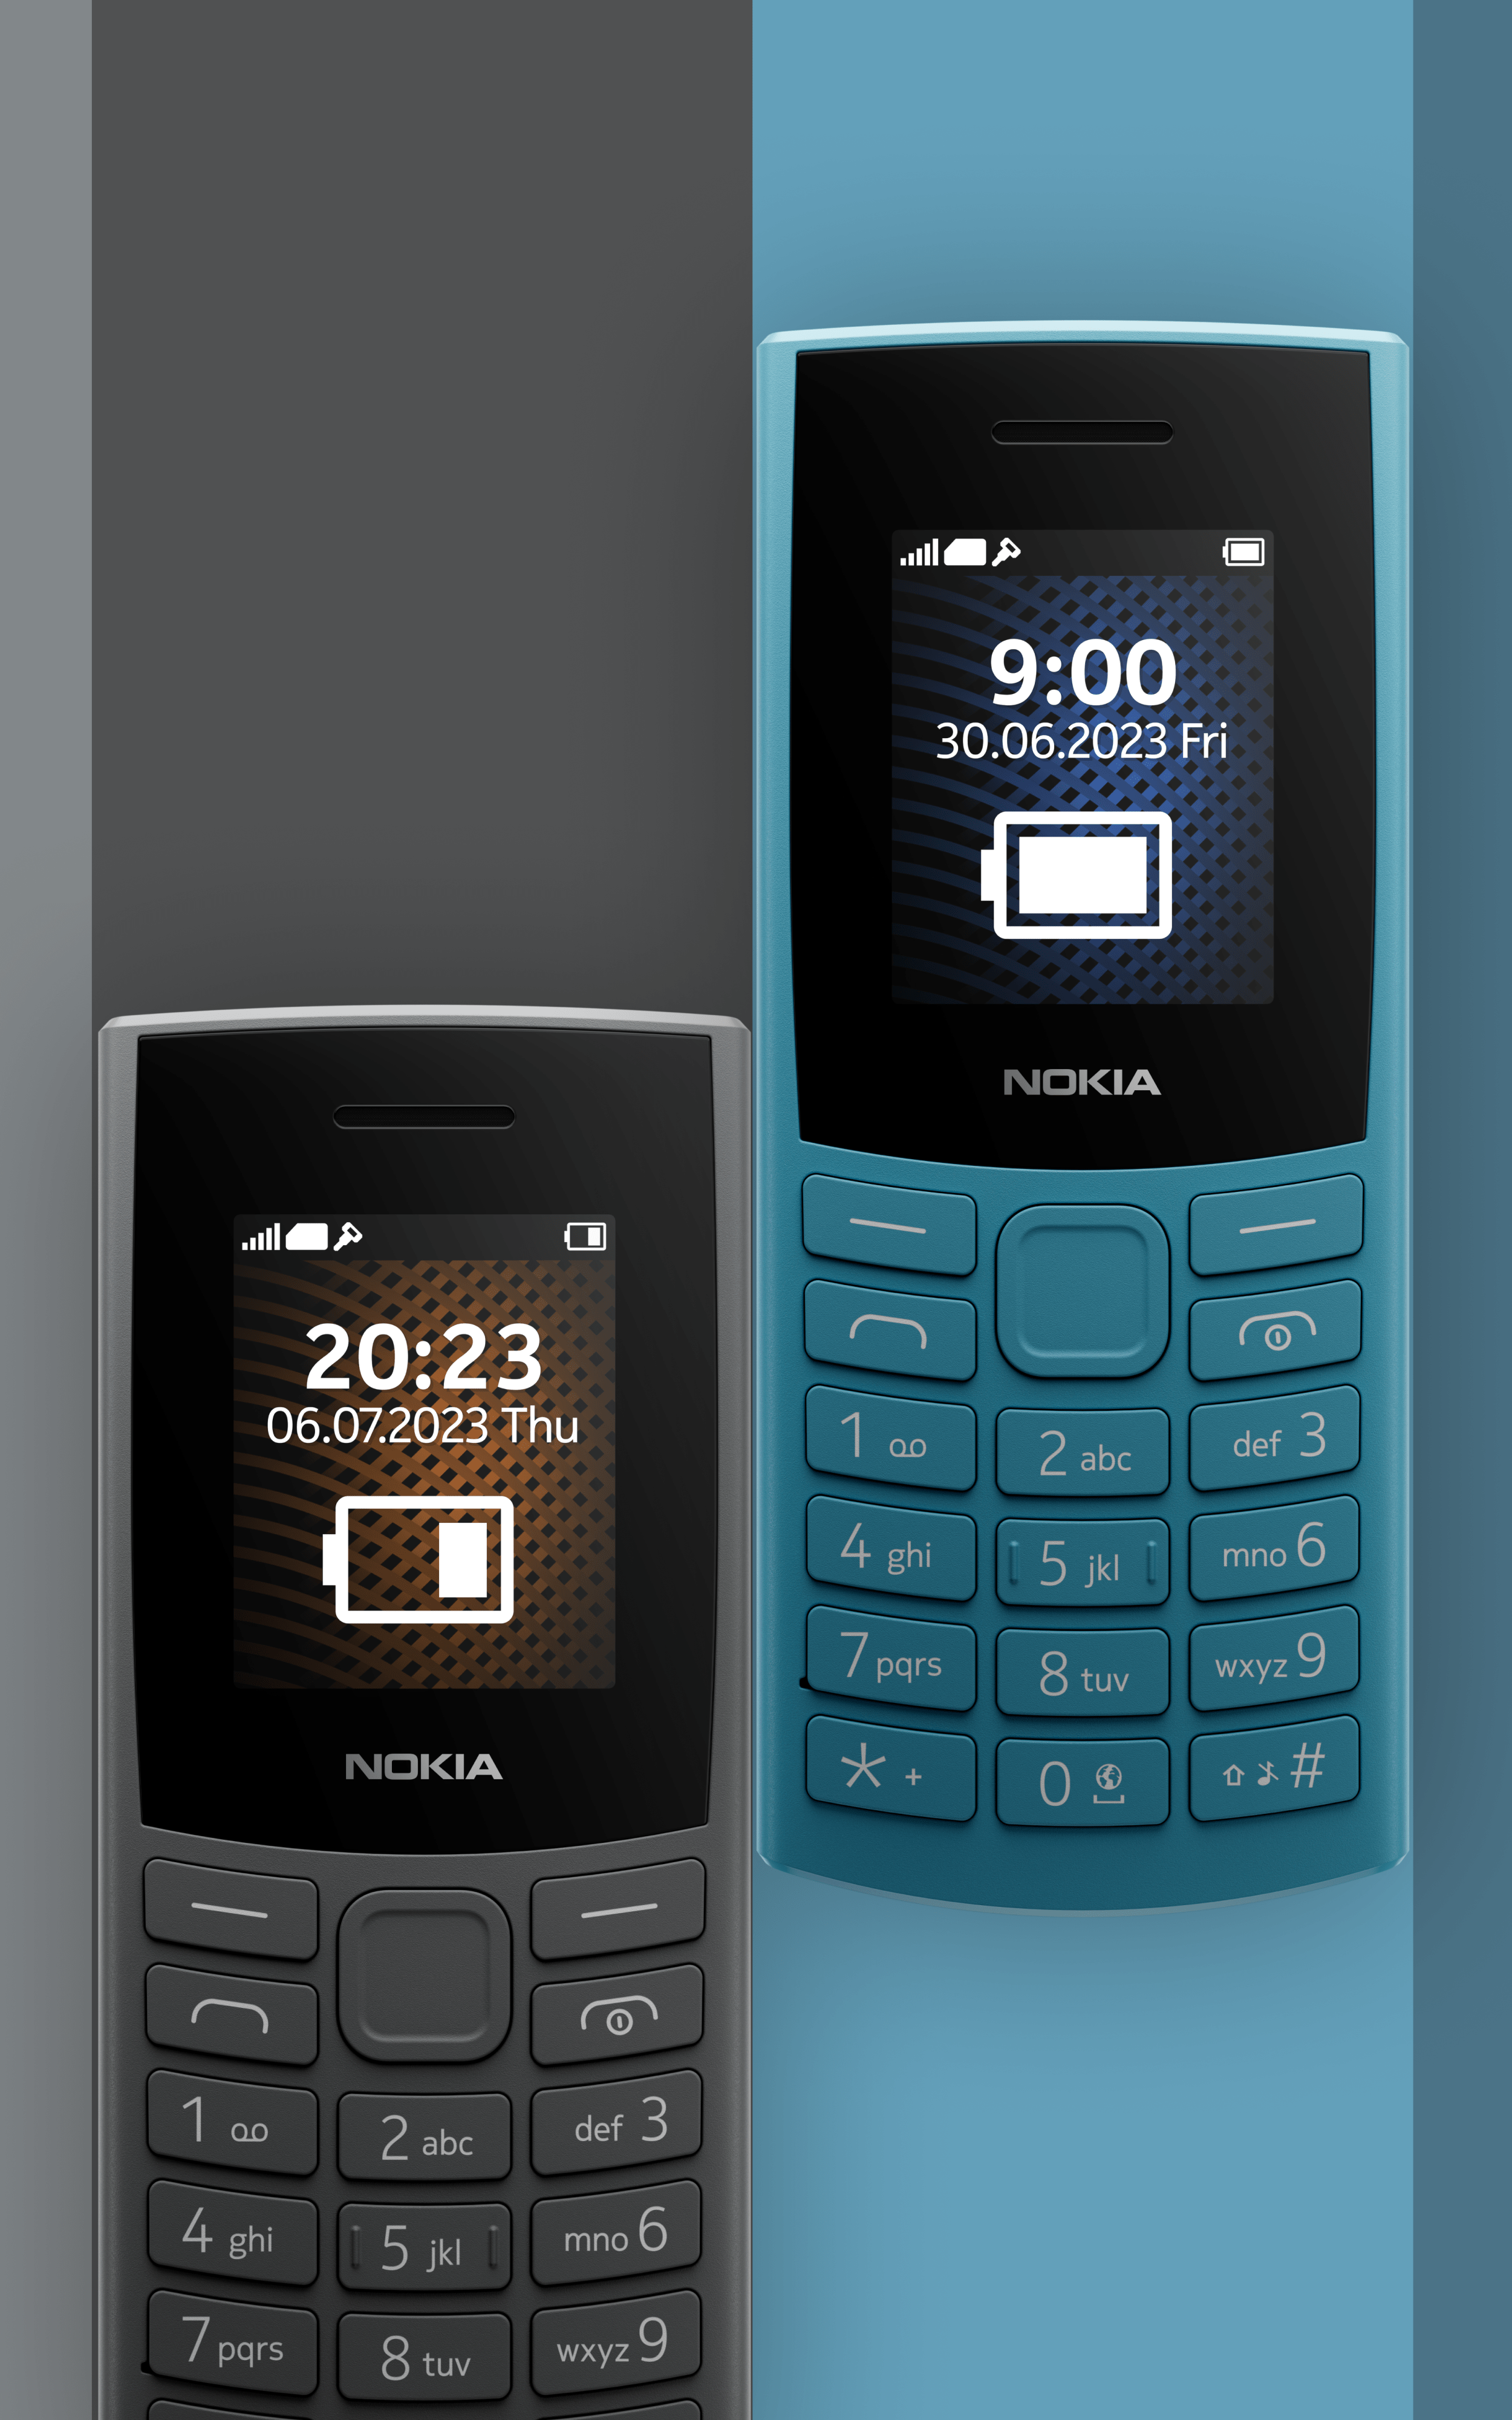 4G feature phone with Nokia 105 internet